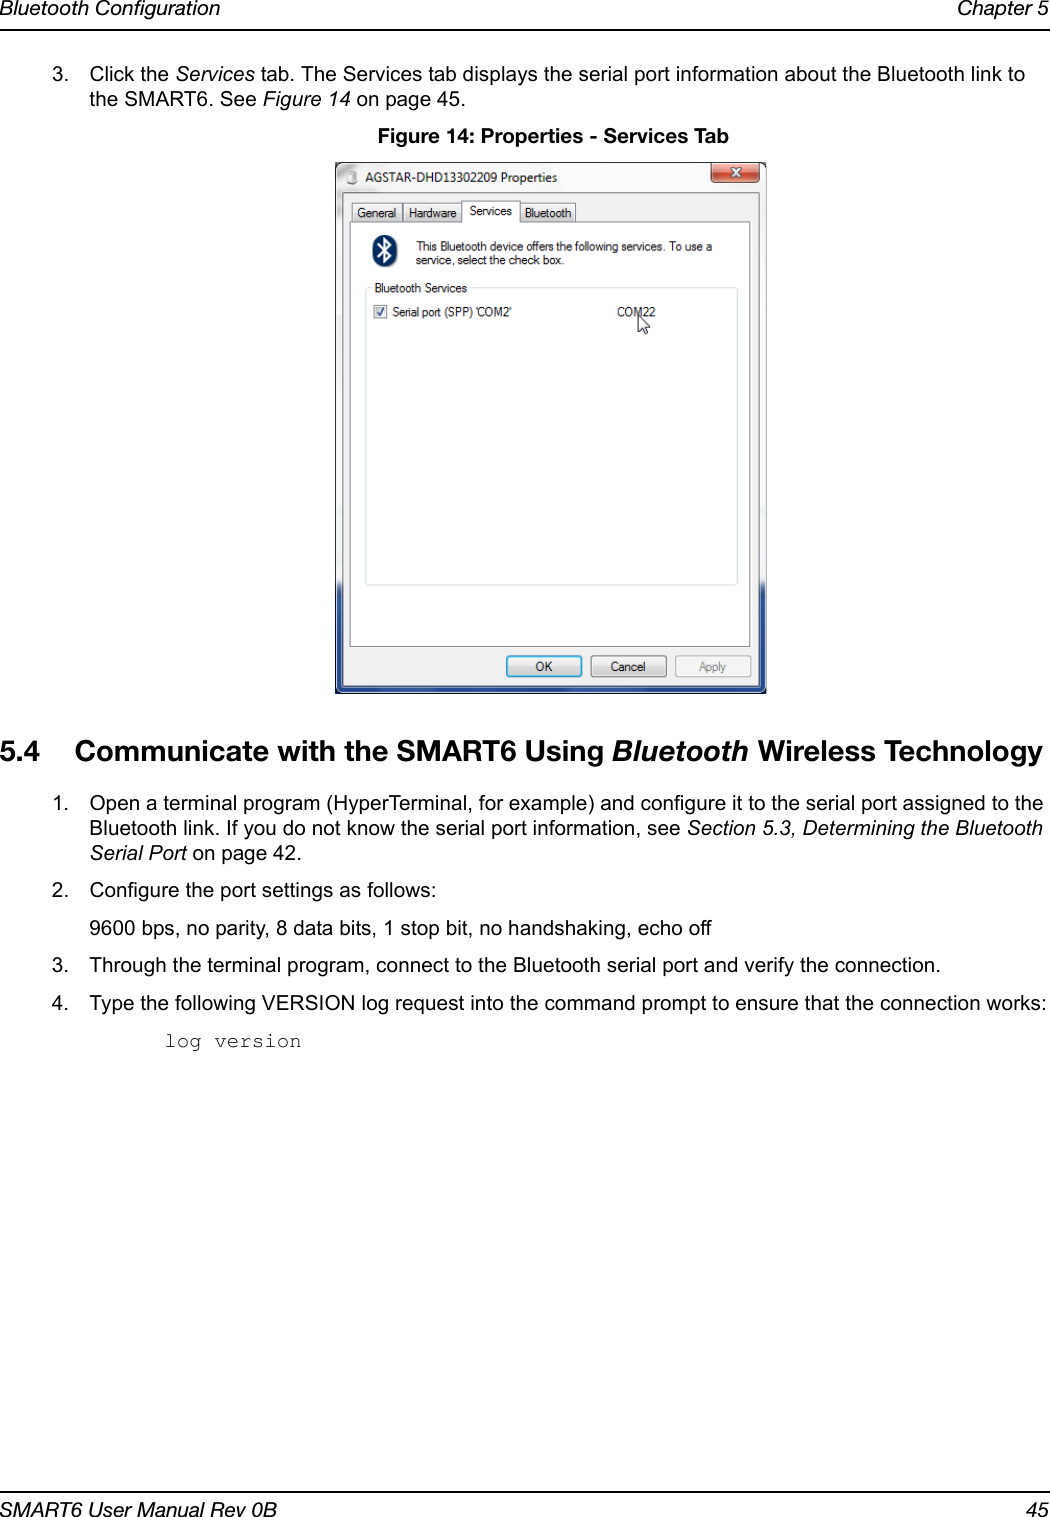 Bluetooth Configuration Chapter 5SMART6 User Manual Rev 0B 453. Click the Services tab. The Services tab displays the serial port information about the Bluetooth link to the SMART6. See Figure 14 on page 45. Figure 14: Properties - Services Tab5.4 Communicate with the SMART6 Using Bluetooth Wireless Technology1. Open a terminal program (HyperTerminal, for example) and configure it to the serial port assigned to the Bluetooth link. If you do not know the serial port information, see Section 5.3, Determining the Bluetooth Serial Port on page 42.2. Configure the port settings as follows:9600 bps, no parity, 8 data bits, 1 stop bit, no handshaking, echo off3. Through the terminal program, connect to the Bluetooth serial port and verify the connection.4. Type the following VERSION log request into the command prompt to ensure that the connection works:log version